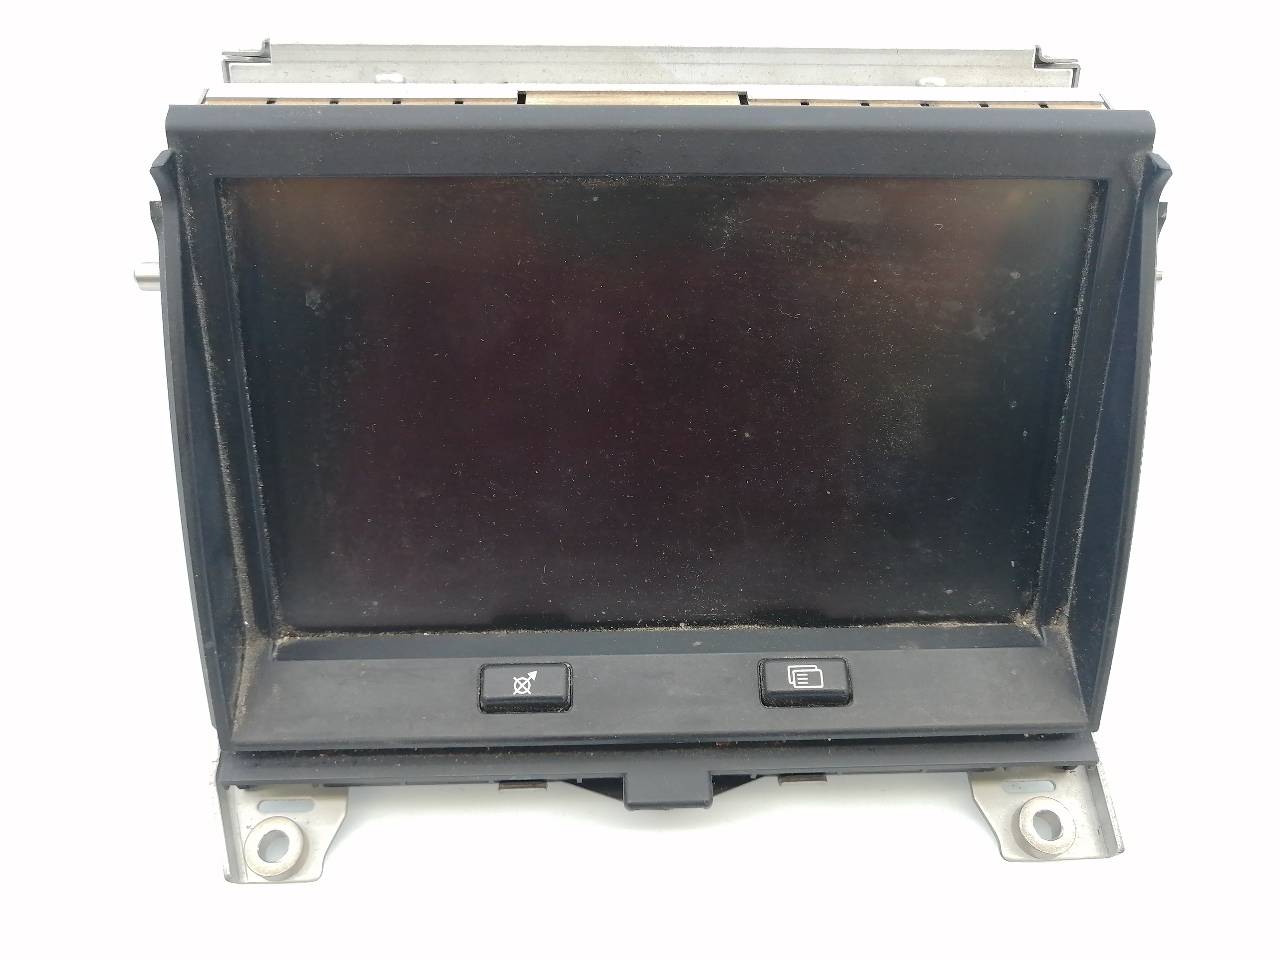 LAND ROVER Discovery 3 generation (2004-2009) Music Player With GPS 4622005481, 68006400, E3-B3-31-1 24019964